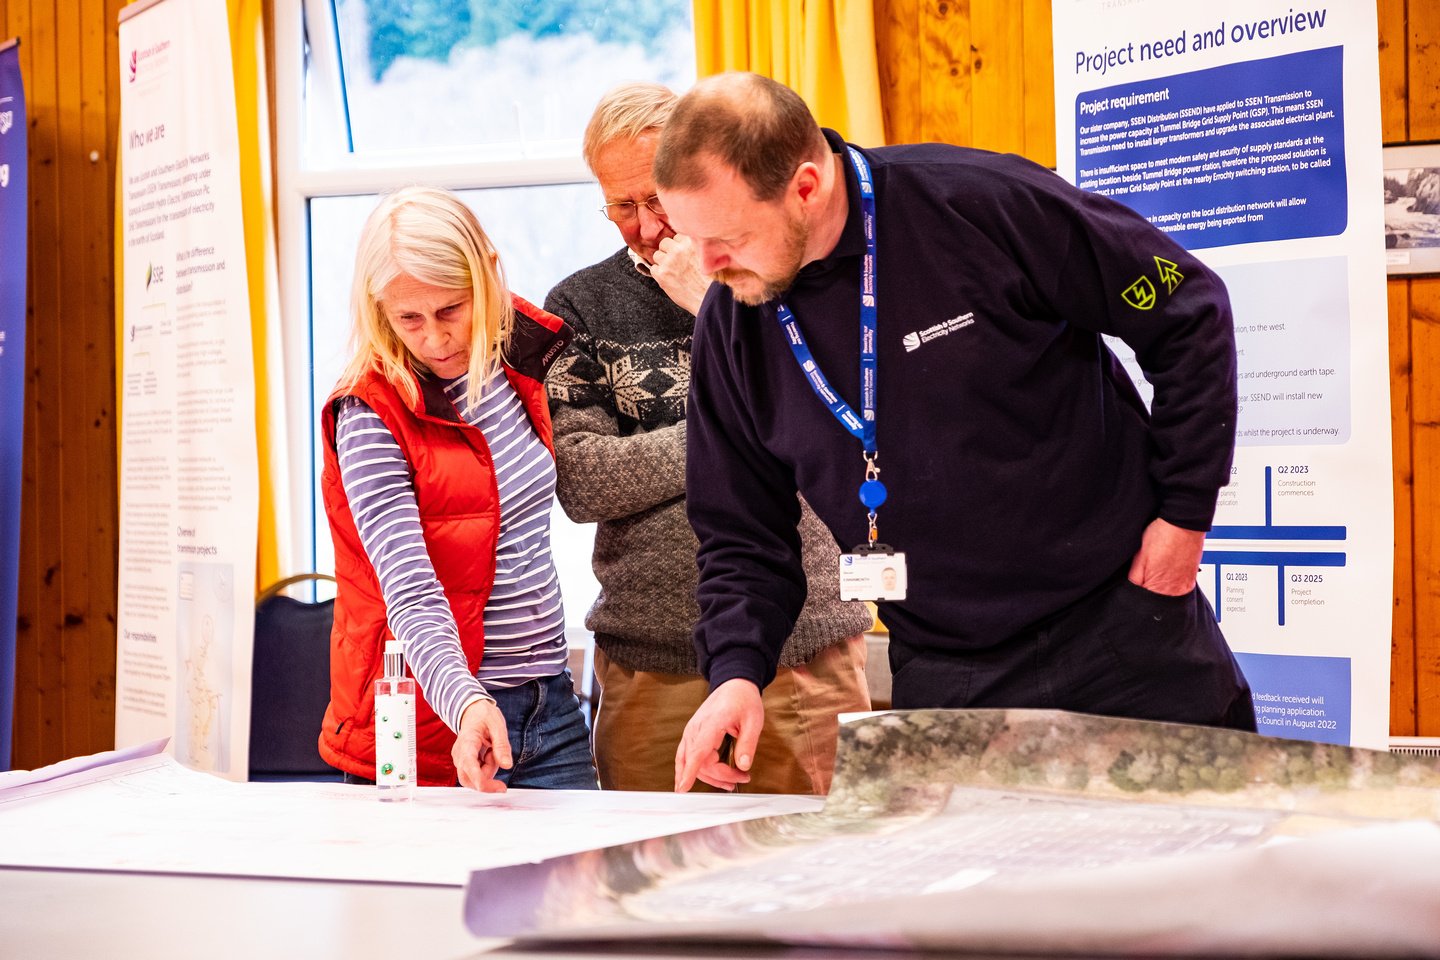 Members of the public and an SSEN Transmission employee examining maps on a table.